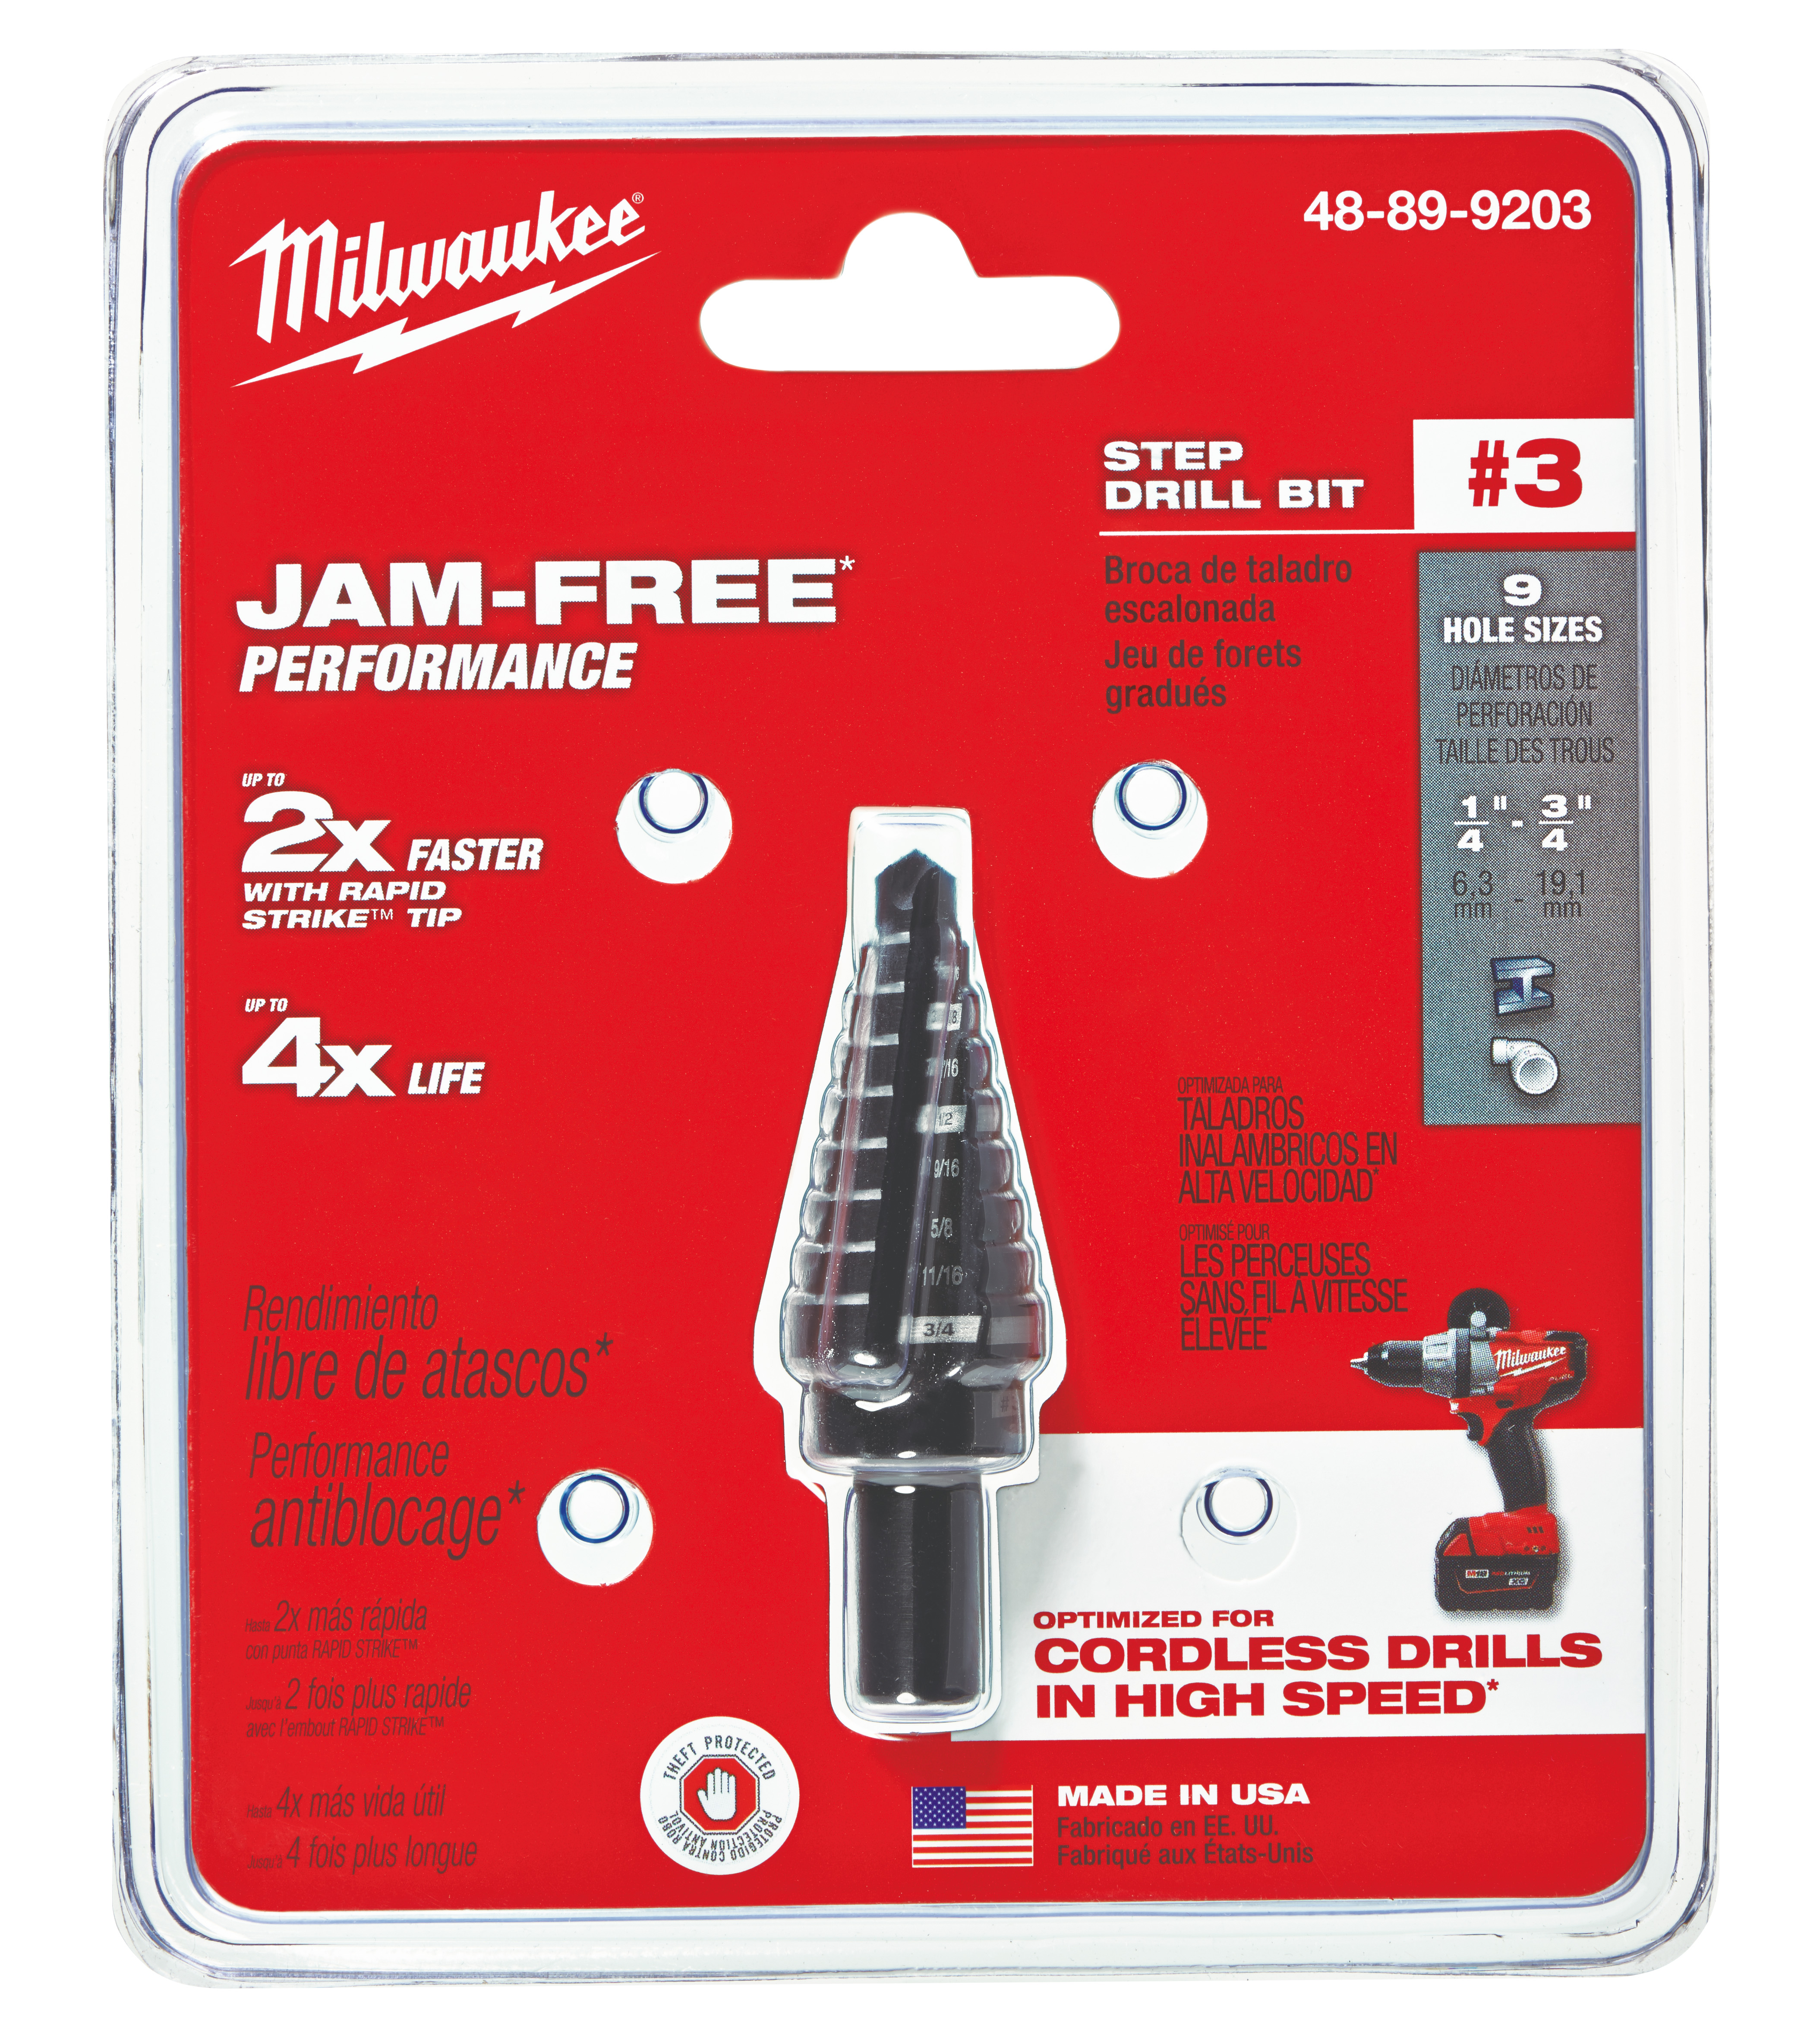 Milwaukee® step drill bits with jam-free performance feature a dual-flute design delivering up to 2X faster hole times, up to 4X longer life and up to 50% more holes per battery charge than competitors. Ideal for drilling small and large-diameter holes in steel and plastic, these bits are optimized for cordless drills in high speed. The Rapid Strike™ tip allows for a fast and accurate start that generates less heat, resulting in longer bit tip life. Black oxide coating also enhances durability, hole quality and bit life. For user convenience and accuracy, each bit has laser-engraved reference marks you can see while drilling. The 3-flat Secure-Grip™ shank ensures a solid connection with the drill chuck. The #3 step drill bit has 9 hole sizes in 1/16 in. increments ranging from 1/4 in. to 3/4 in. jam-free performance in high speed with most professional 18 Volt cordless drills with lithium-ion battery technology.